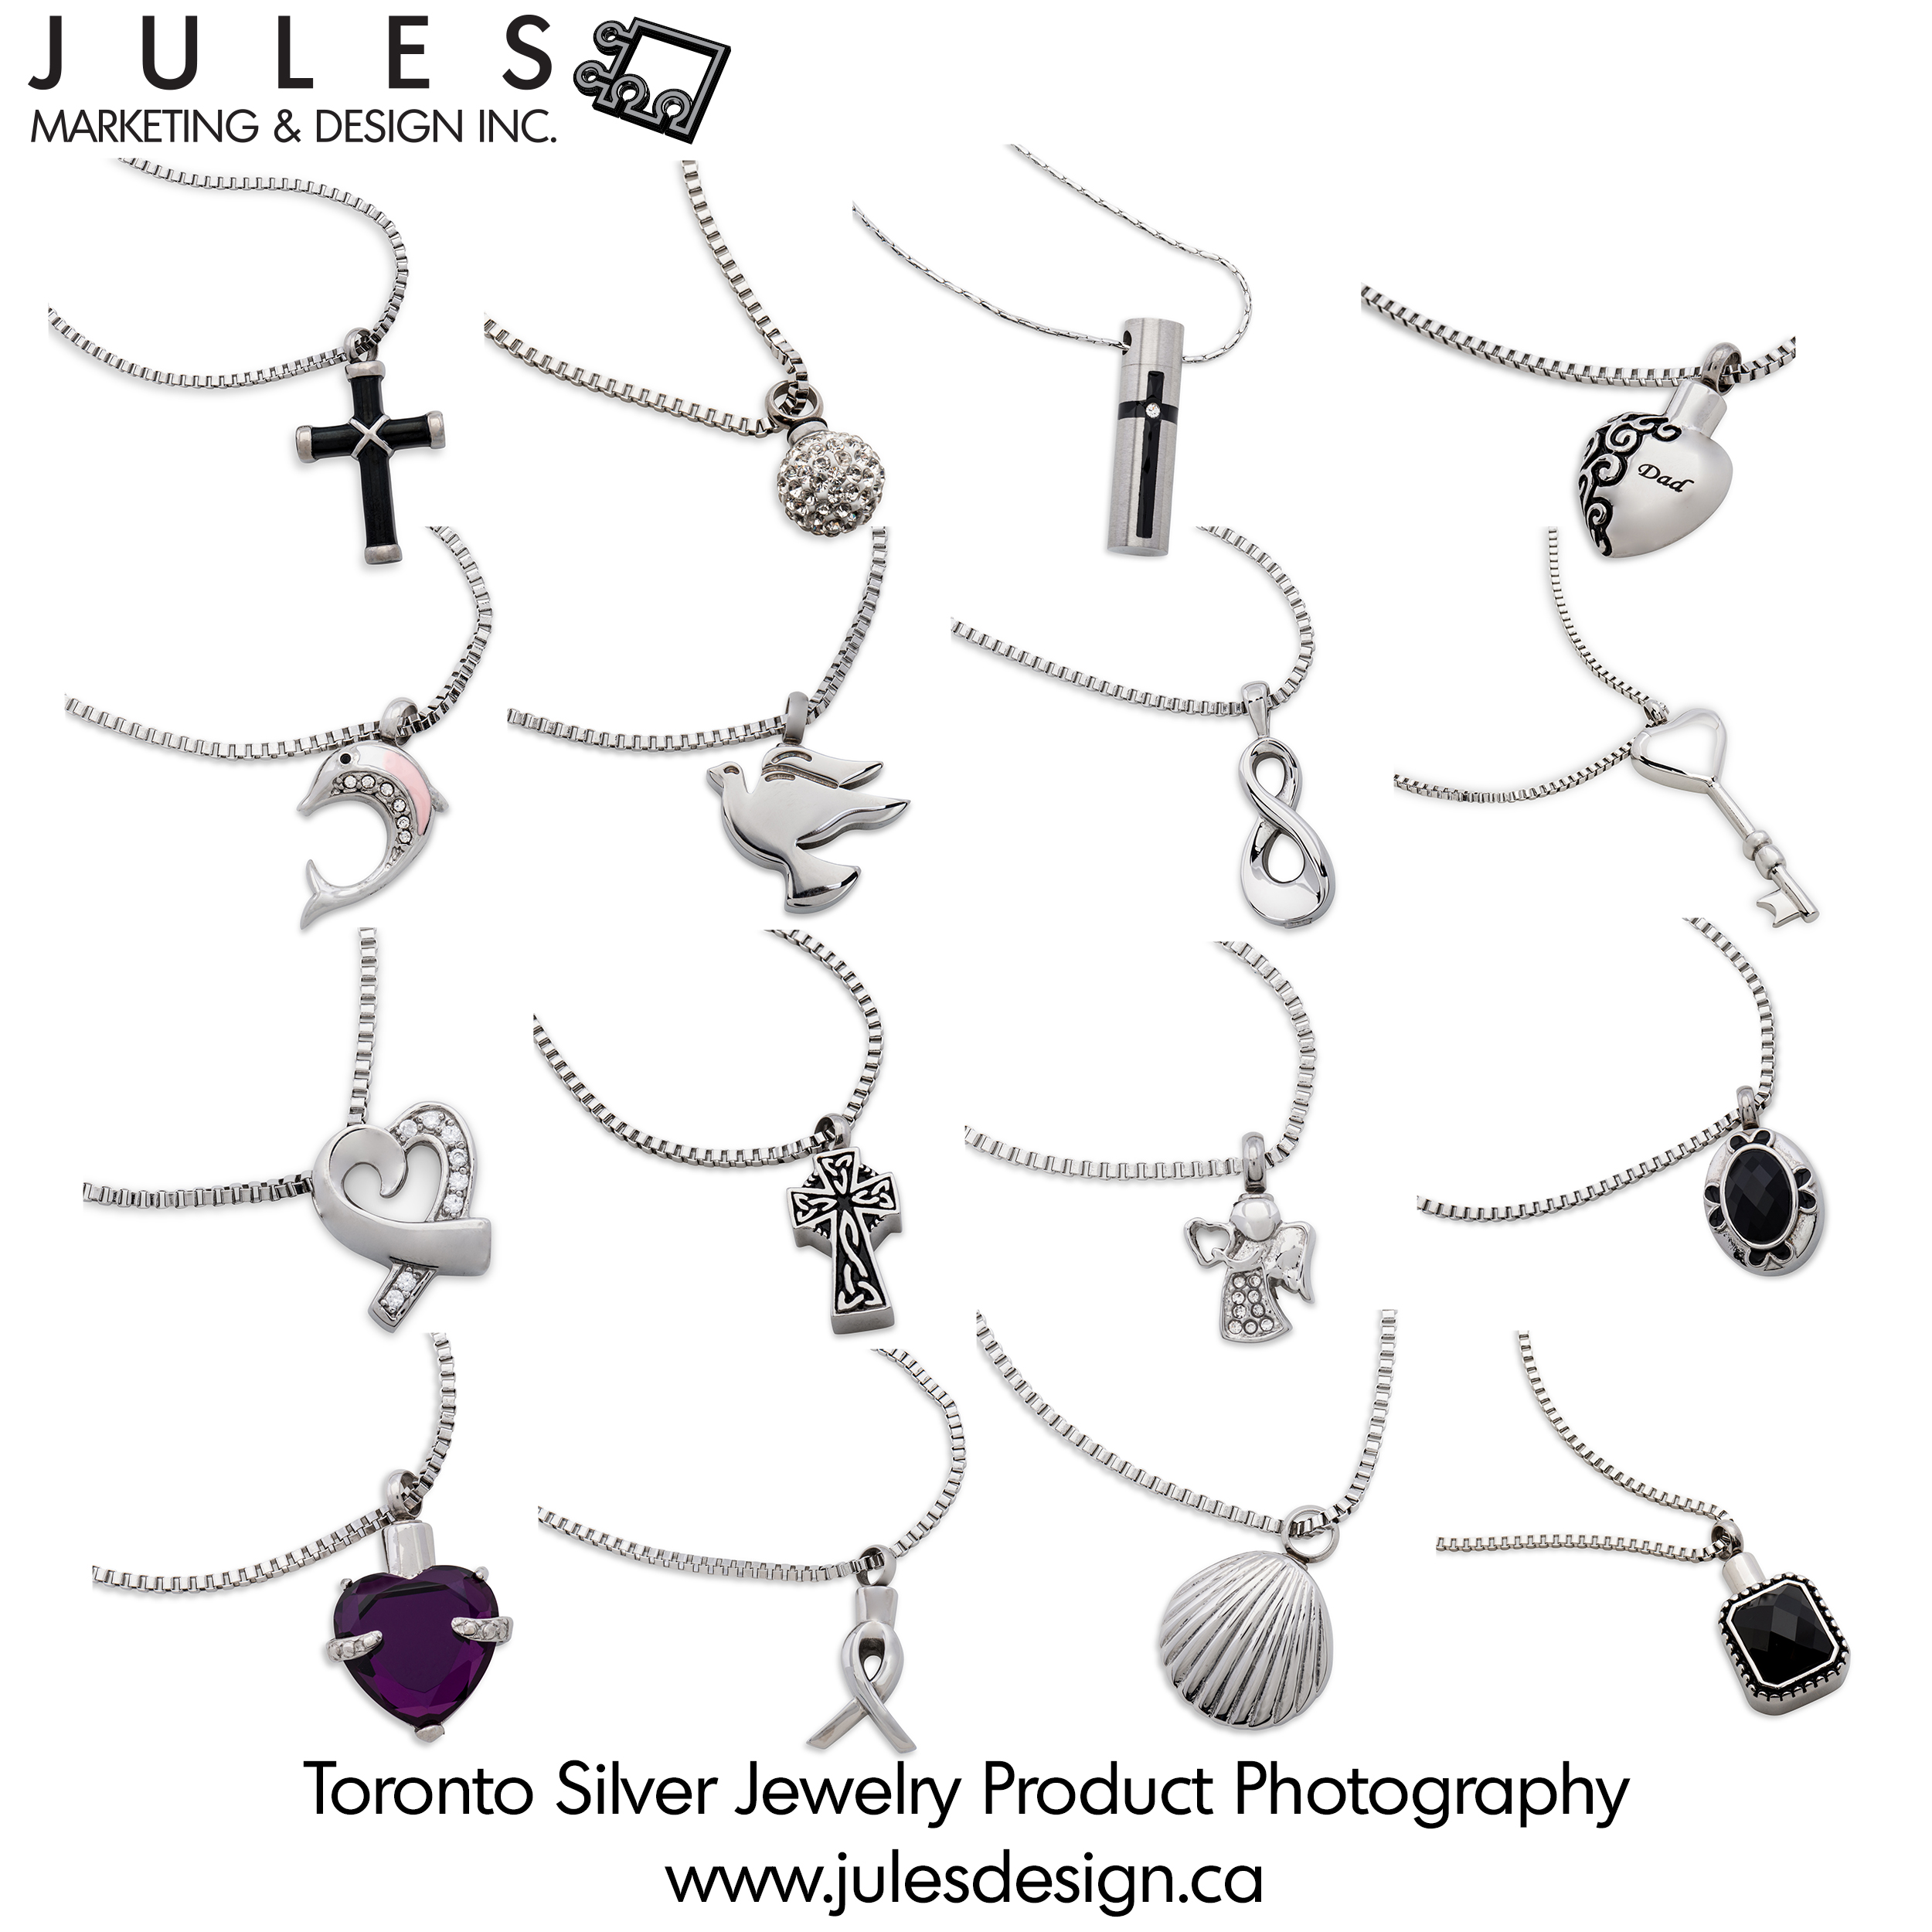 Toronto Silver Jewelry Product Photography